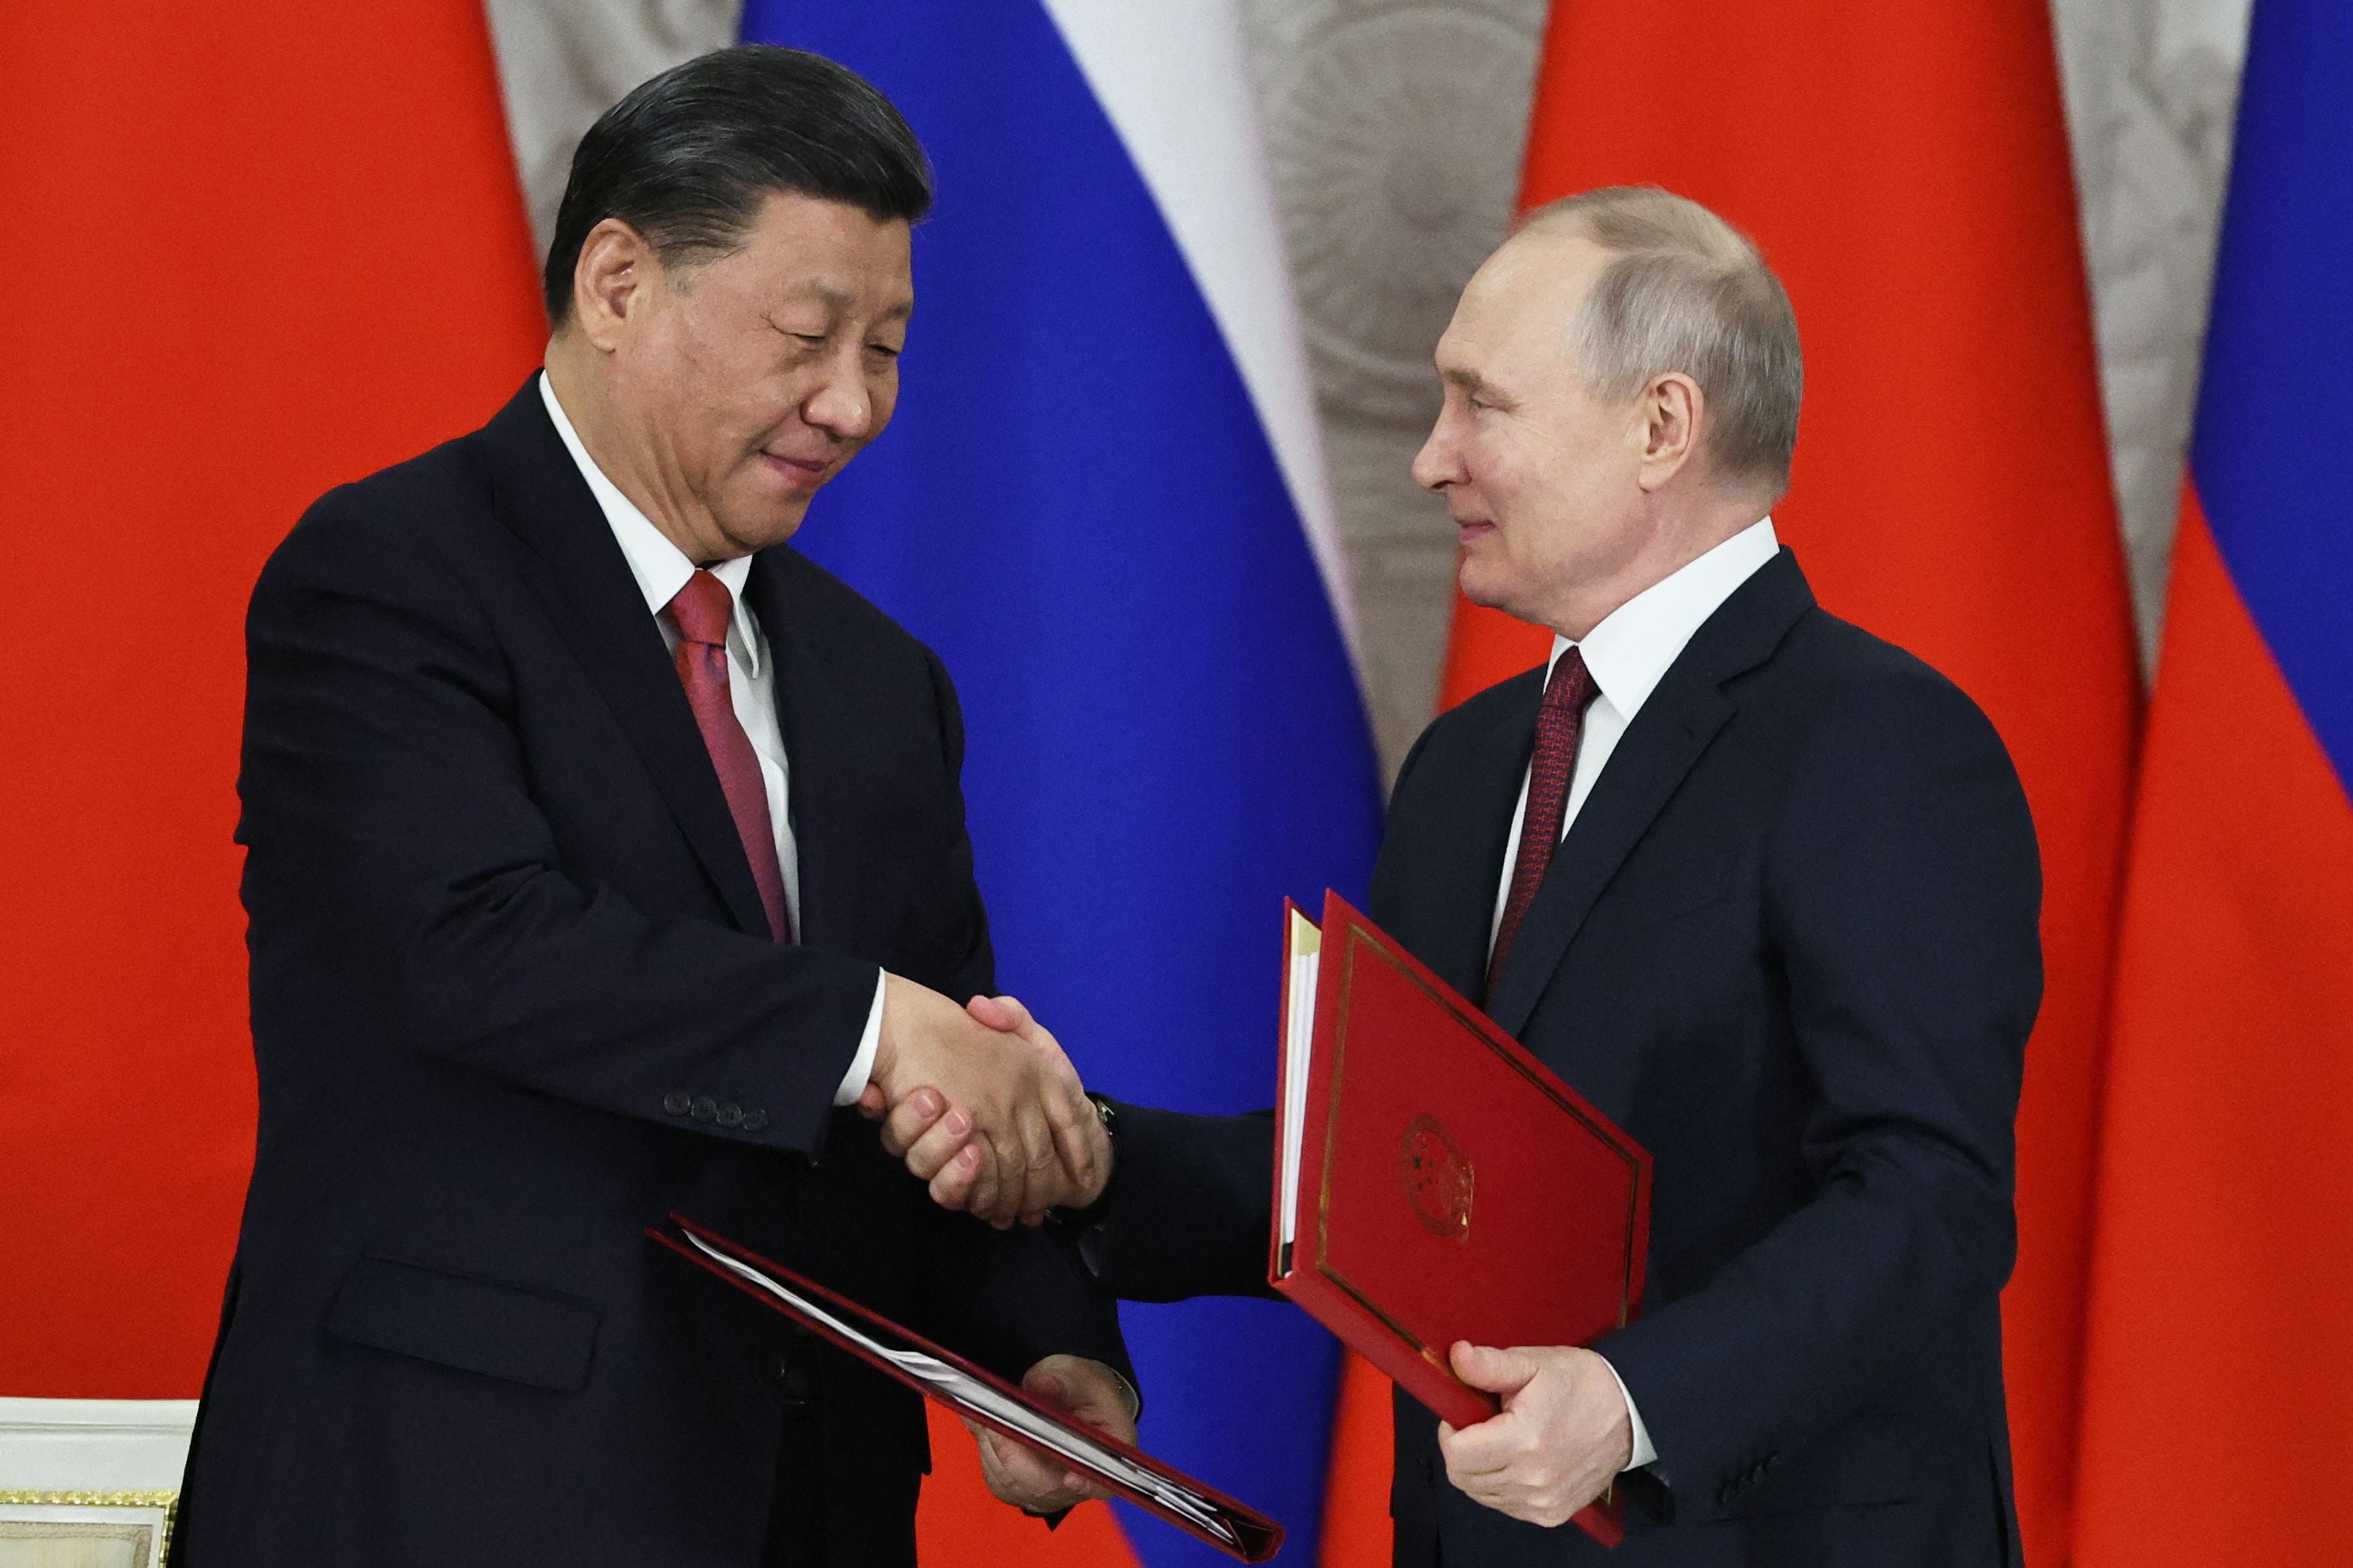 Russian President Vladimir Putin and his Chinese counterpart Xi Jinping shake hands during an agreement signing ceremony following their talks at the Kremlin in Moscow on March 21, 2023. (Photo by Mikhail TERESHCHENKO/SPUTNIK/ AFP).